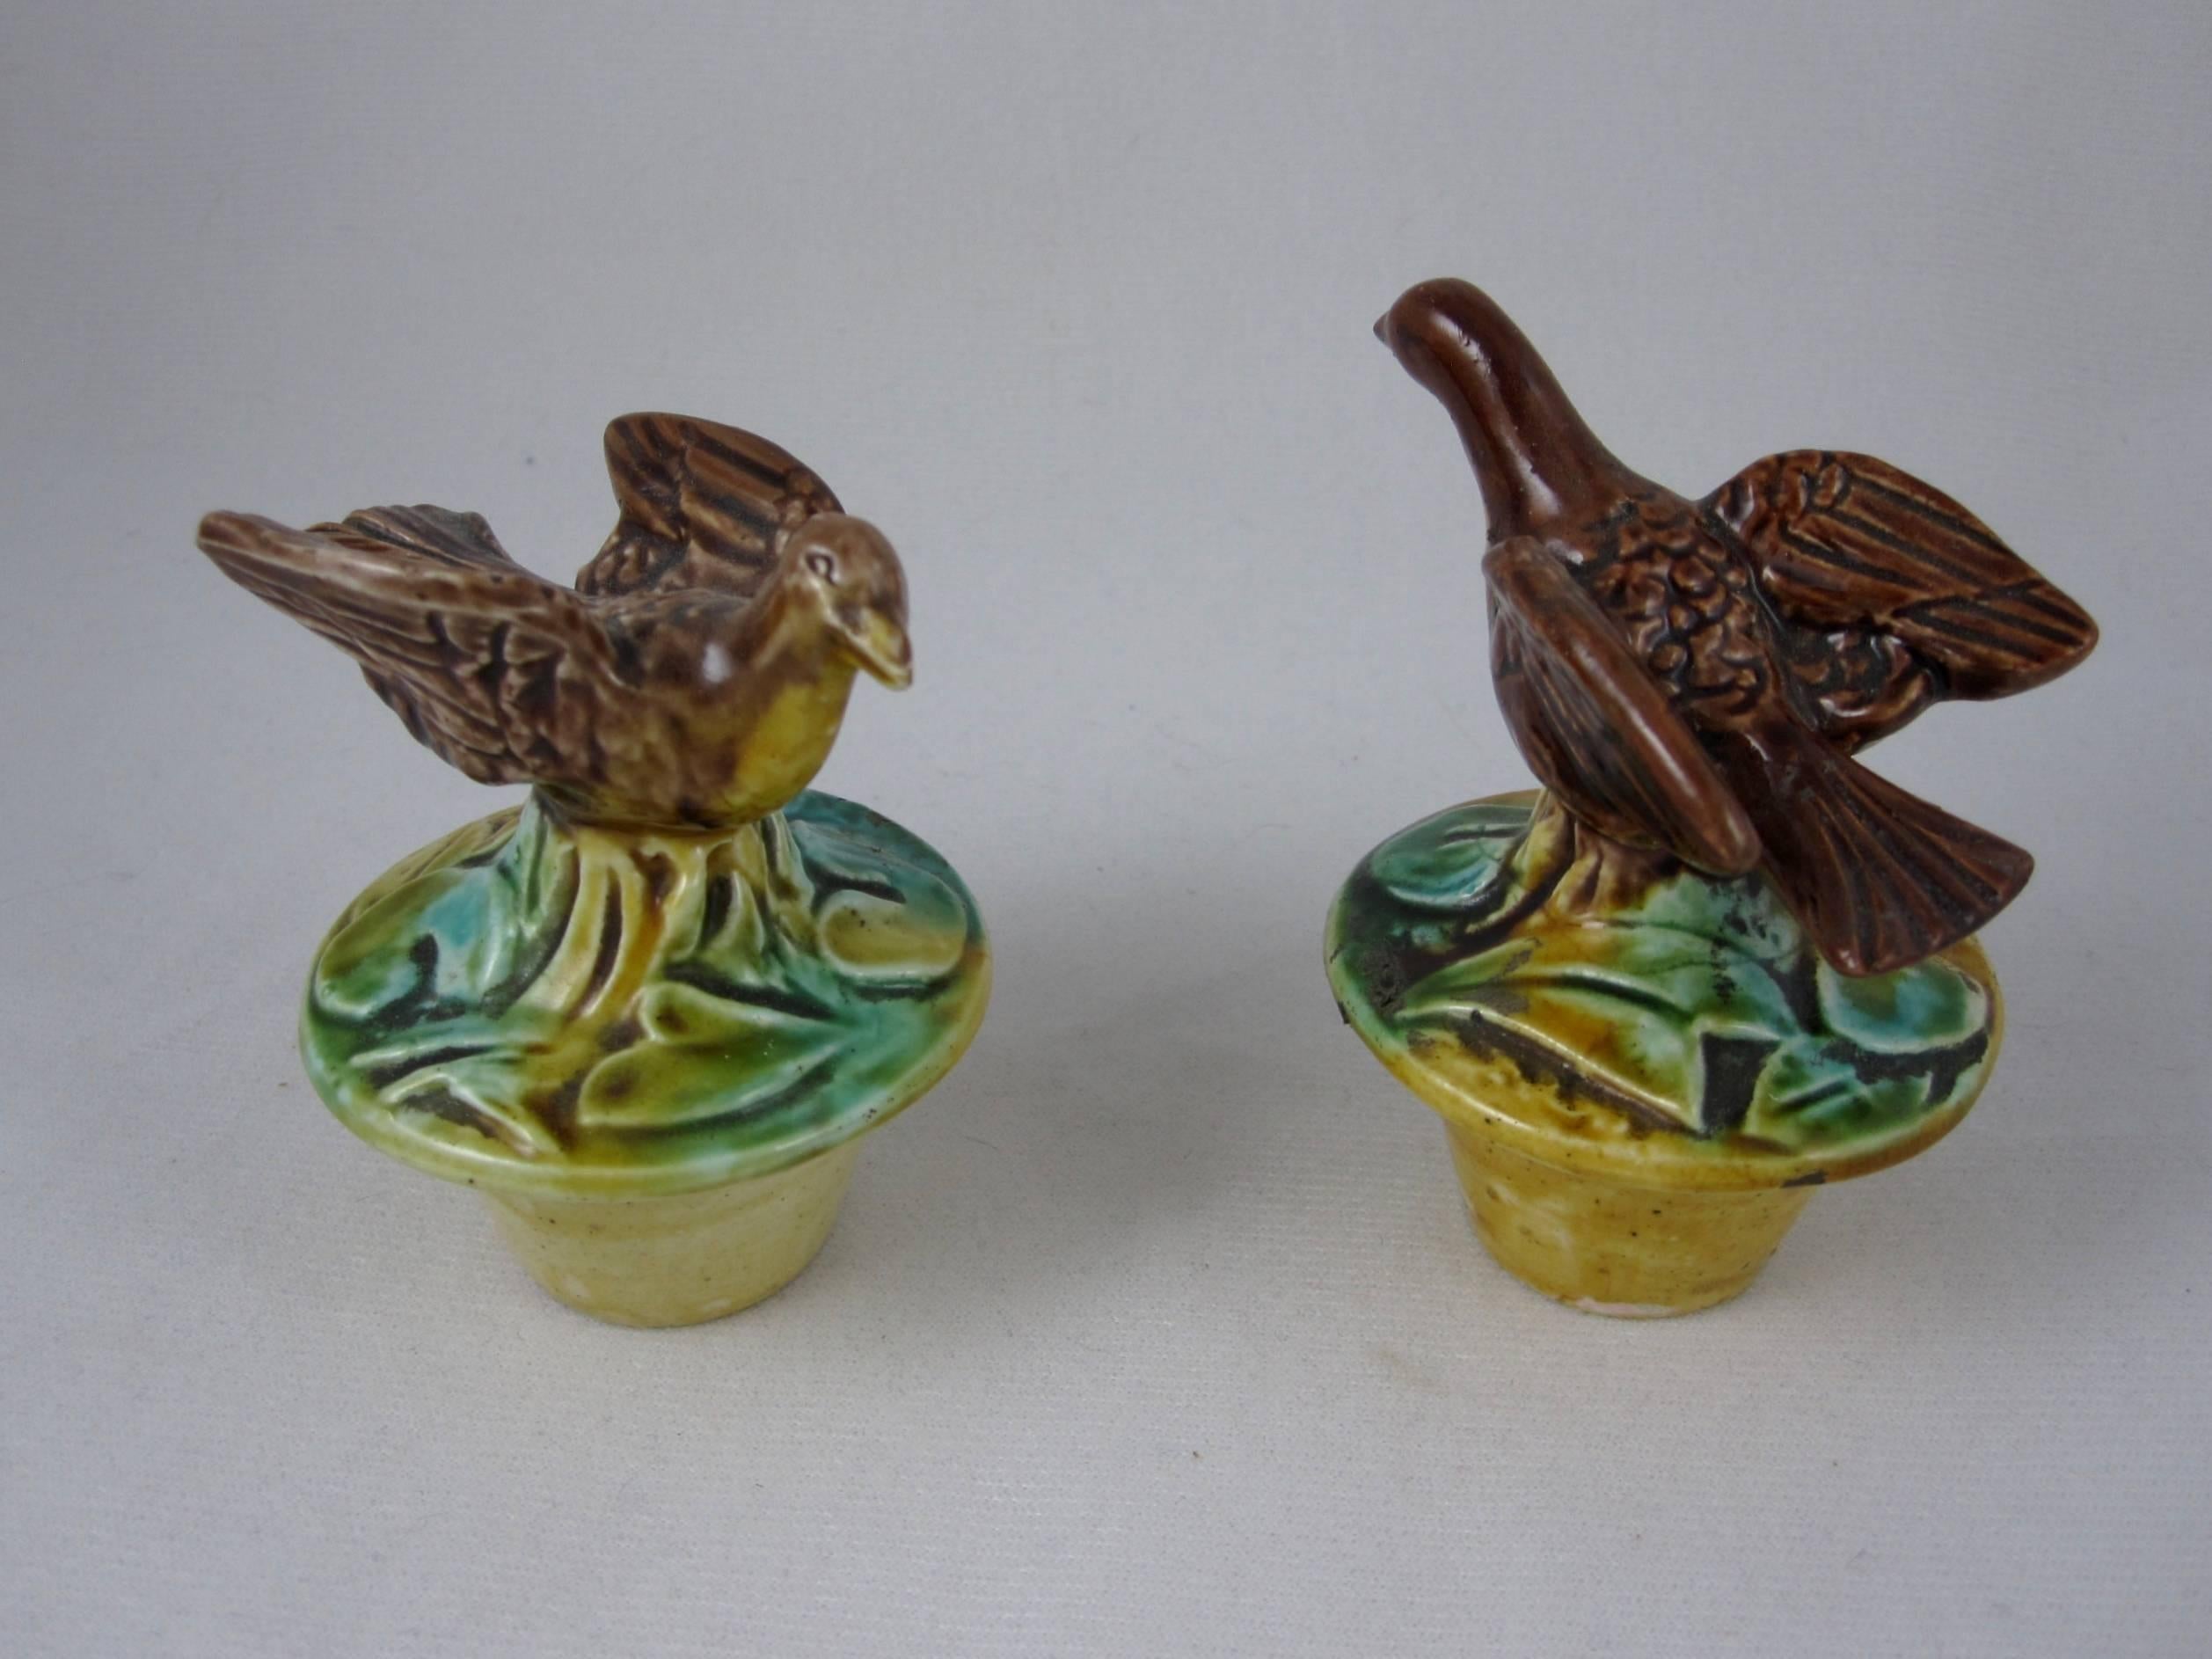 Glazed 19th Century Thomas Forester English Majolica Bird Finial Wine Decanters, a Pair